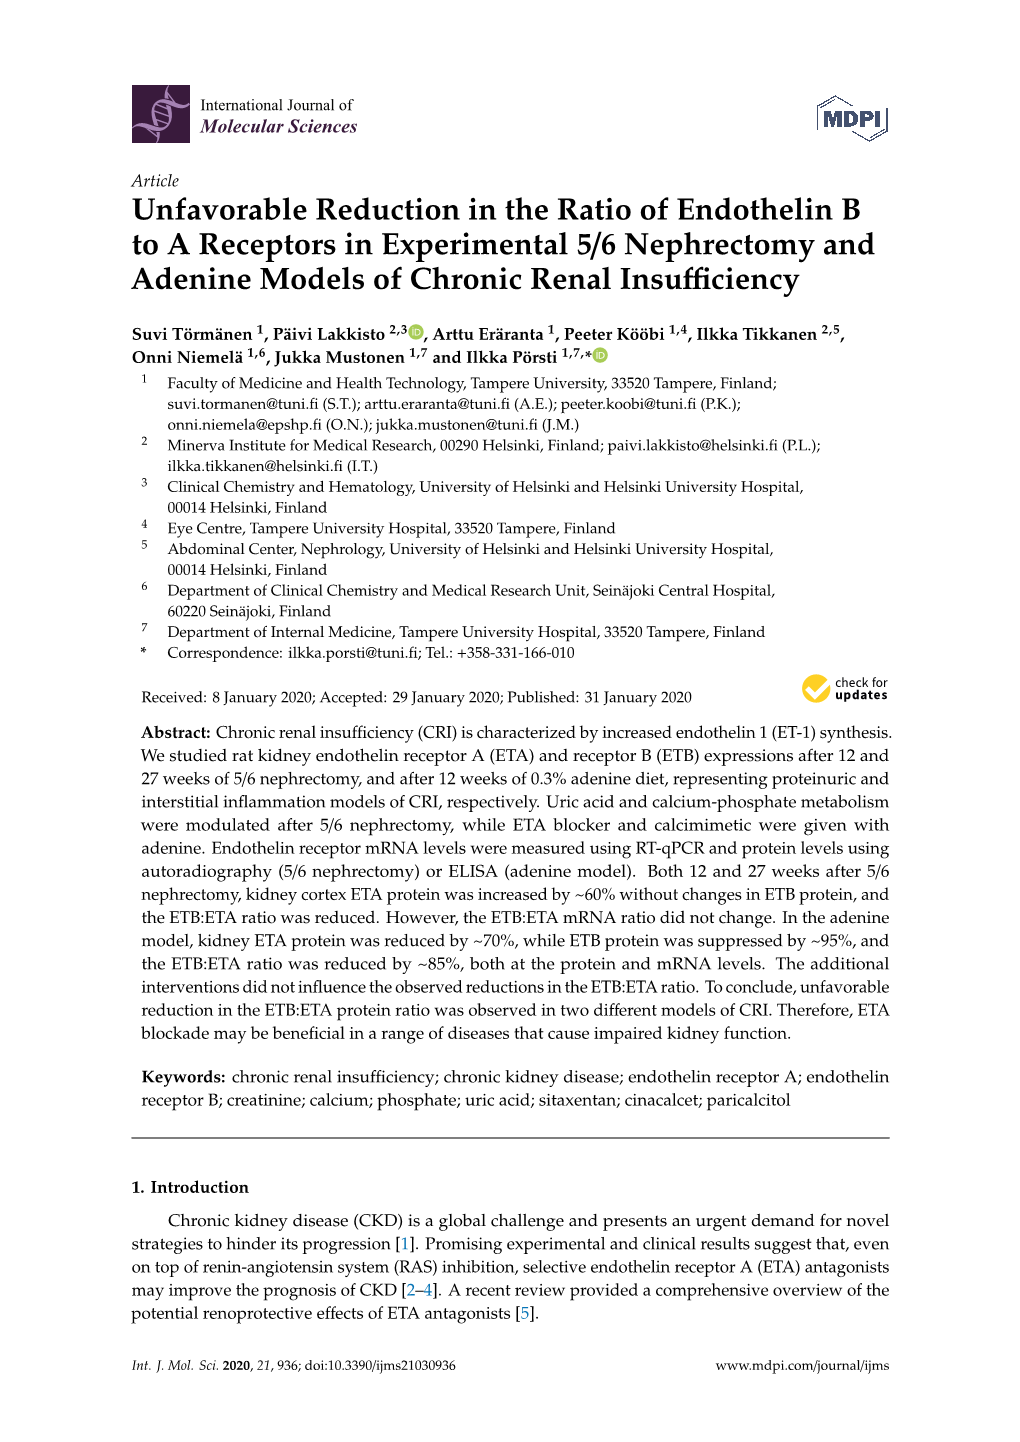 Unfavorable Reduction in the Ratio of Endothelin B to a Receptors in Experimental 5/6 Nephrectomy and Adenine Models of Chronic Renal Insuﬃciency